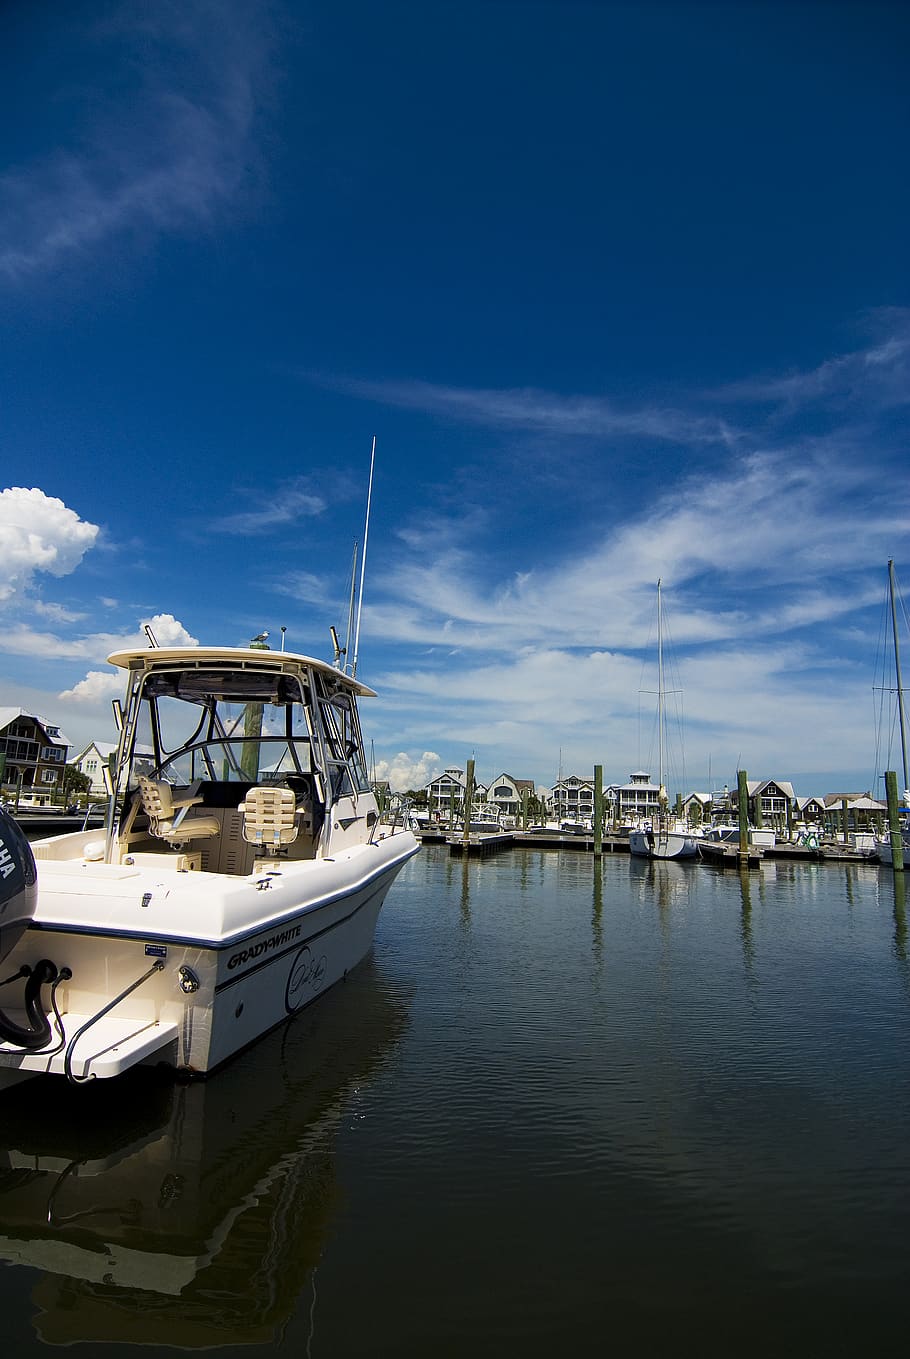 united states, bald head island, harbour, harbor, water, boats